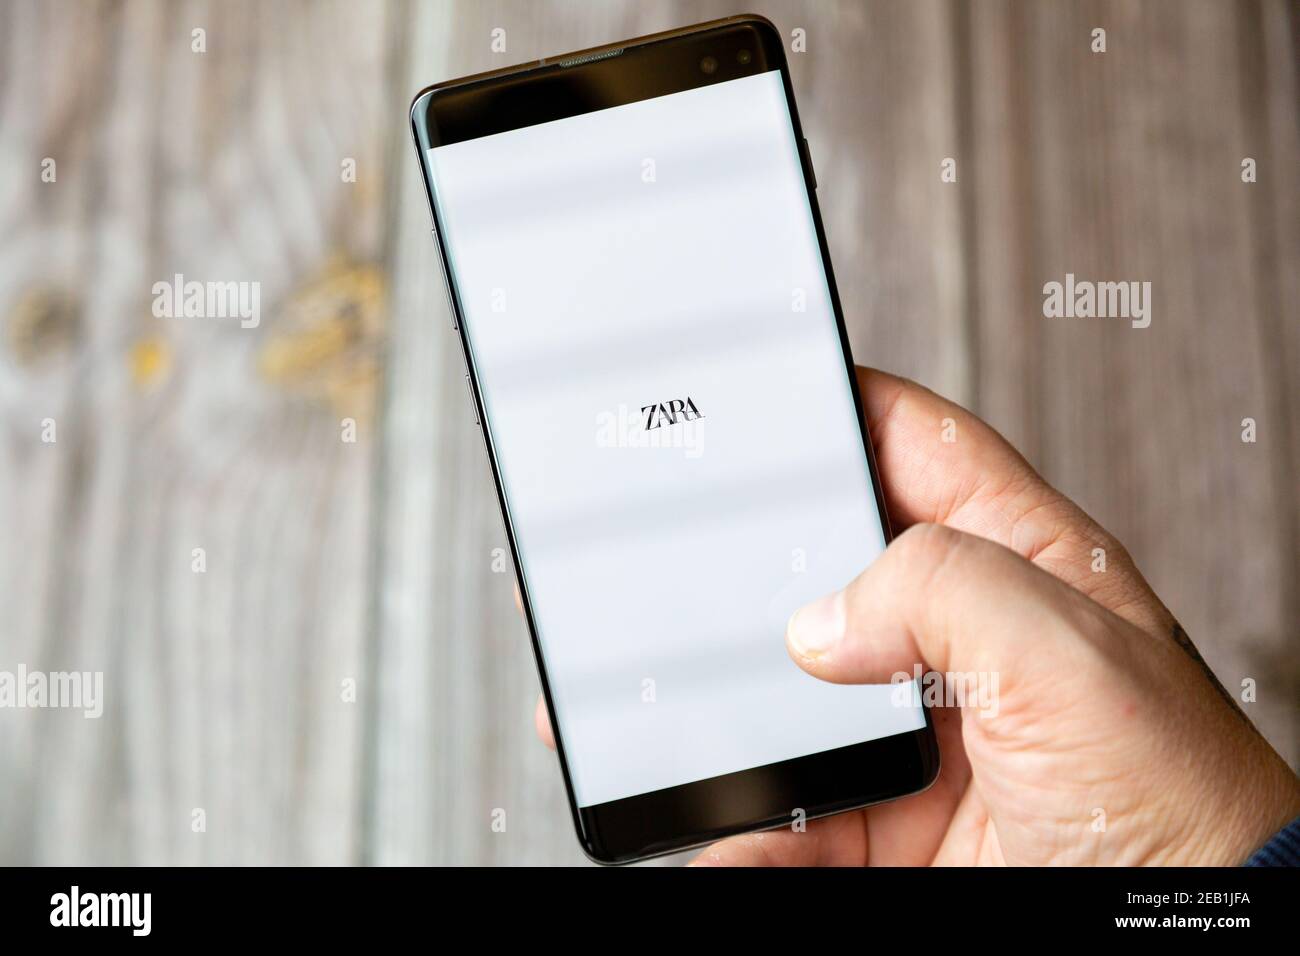 A mobile phone or cell phone being held by a hand with the Zara app open on  screen Stock Photo - Alamy